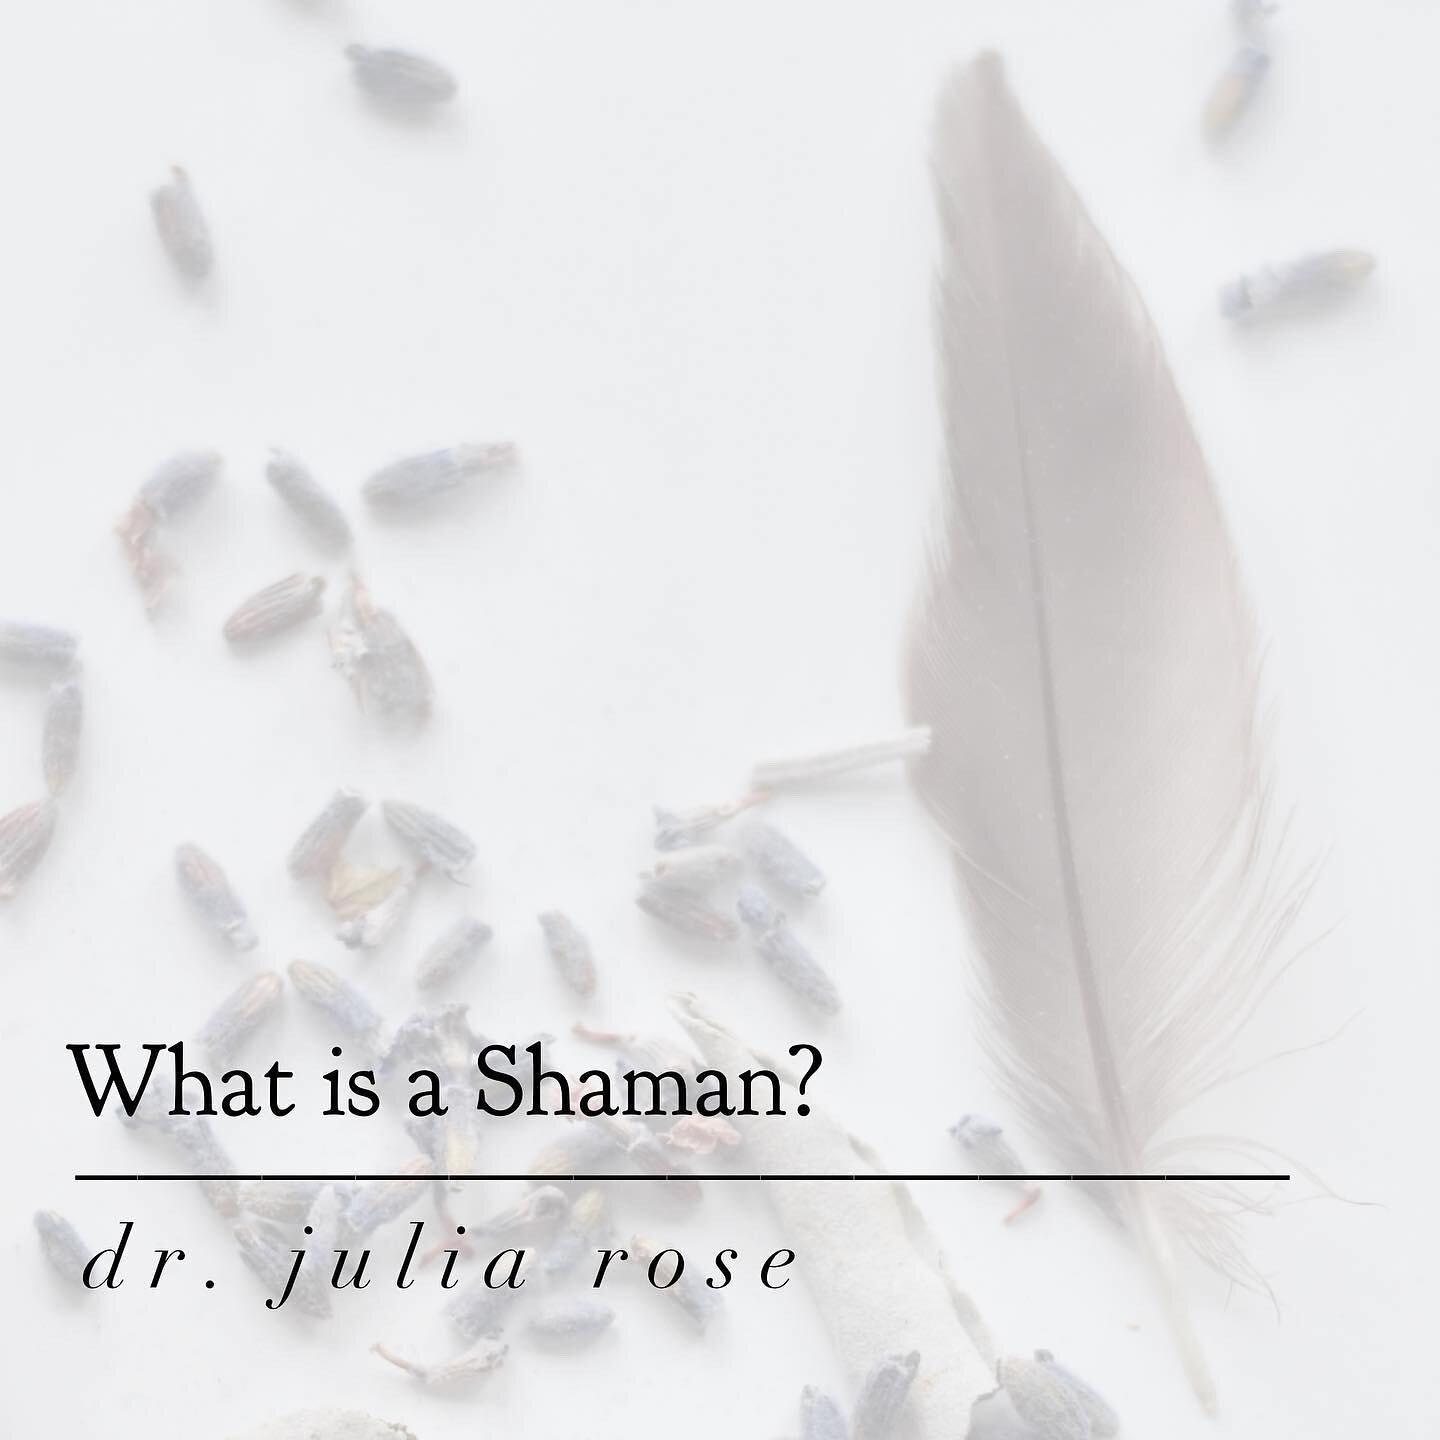 Let&rsquo;s demystify the origin and use of the word Shaman.

There are many Shamans who don&rsquo;t use the title, and many who do.

There are many ways to be a Shaman, and many depths to the Shamanic path.

The nature of the medicine though, is alw